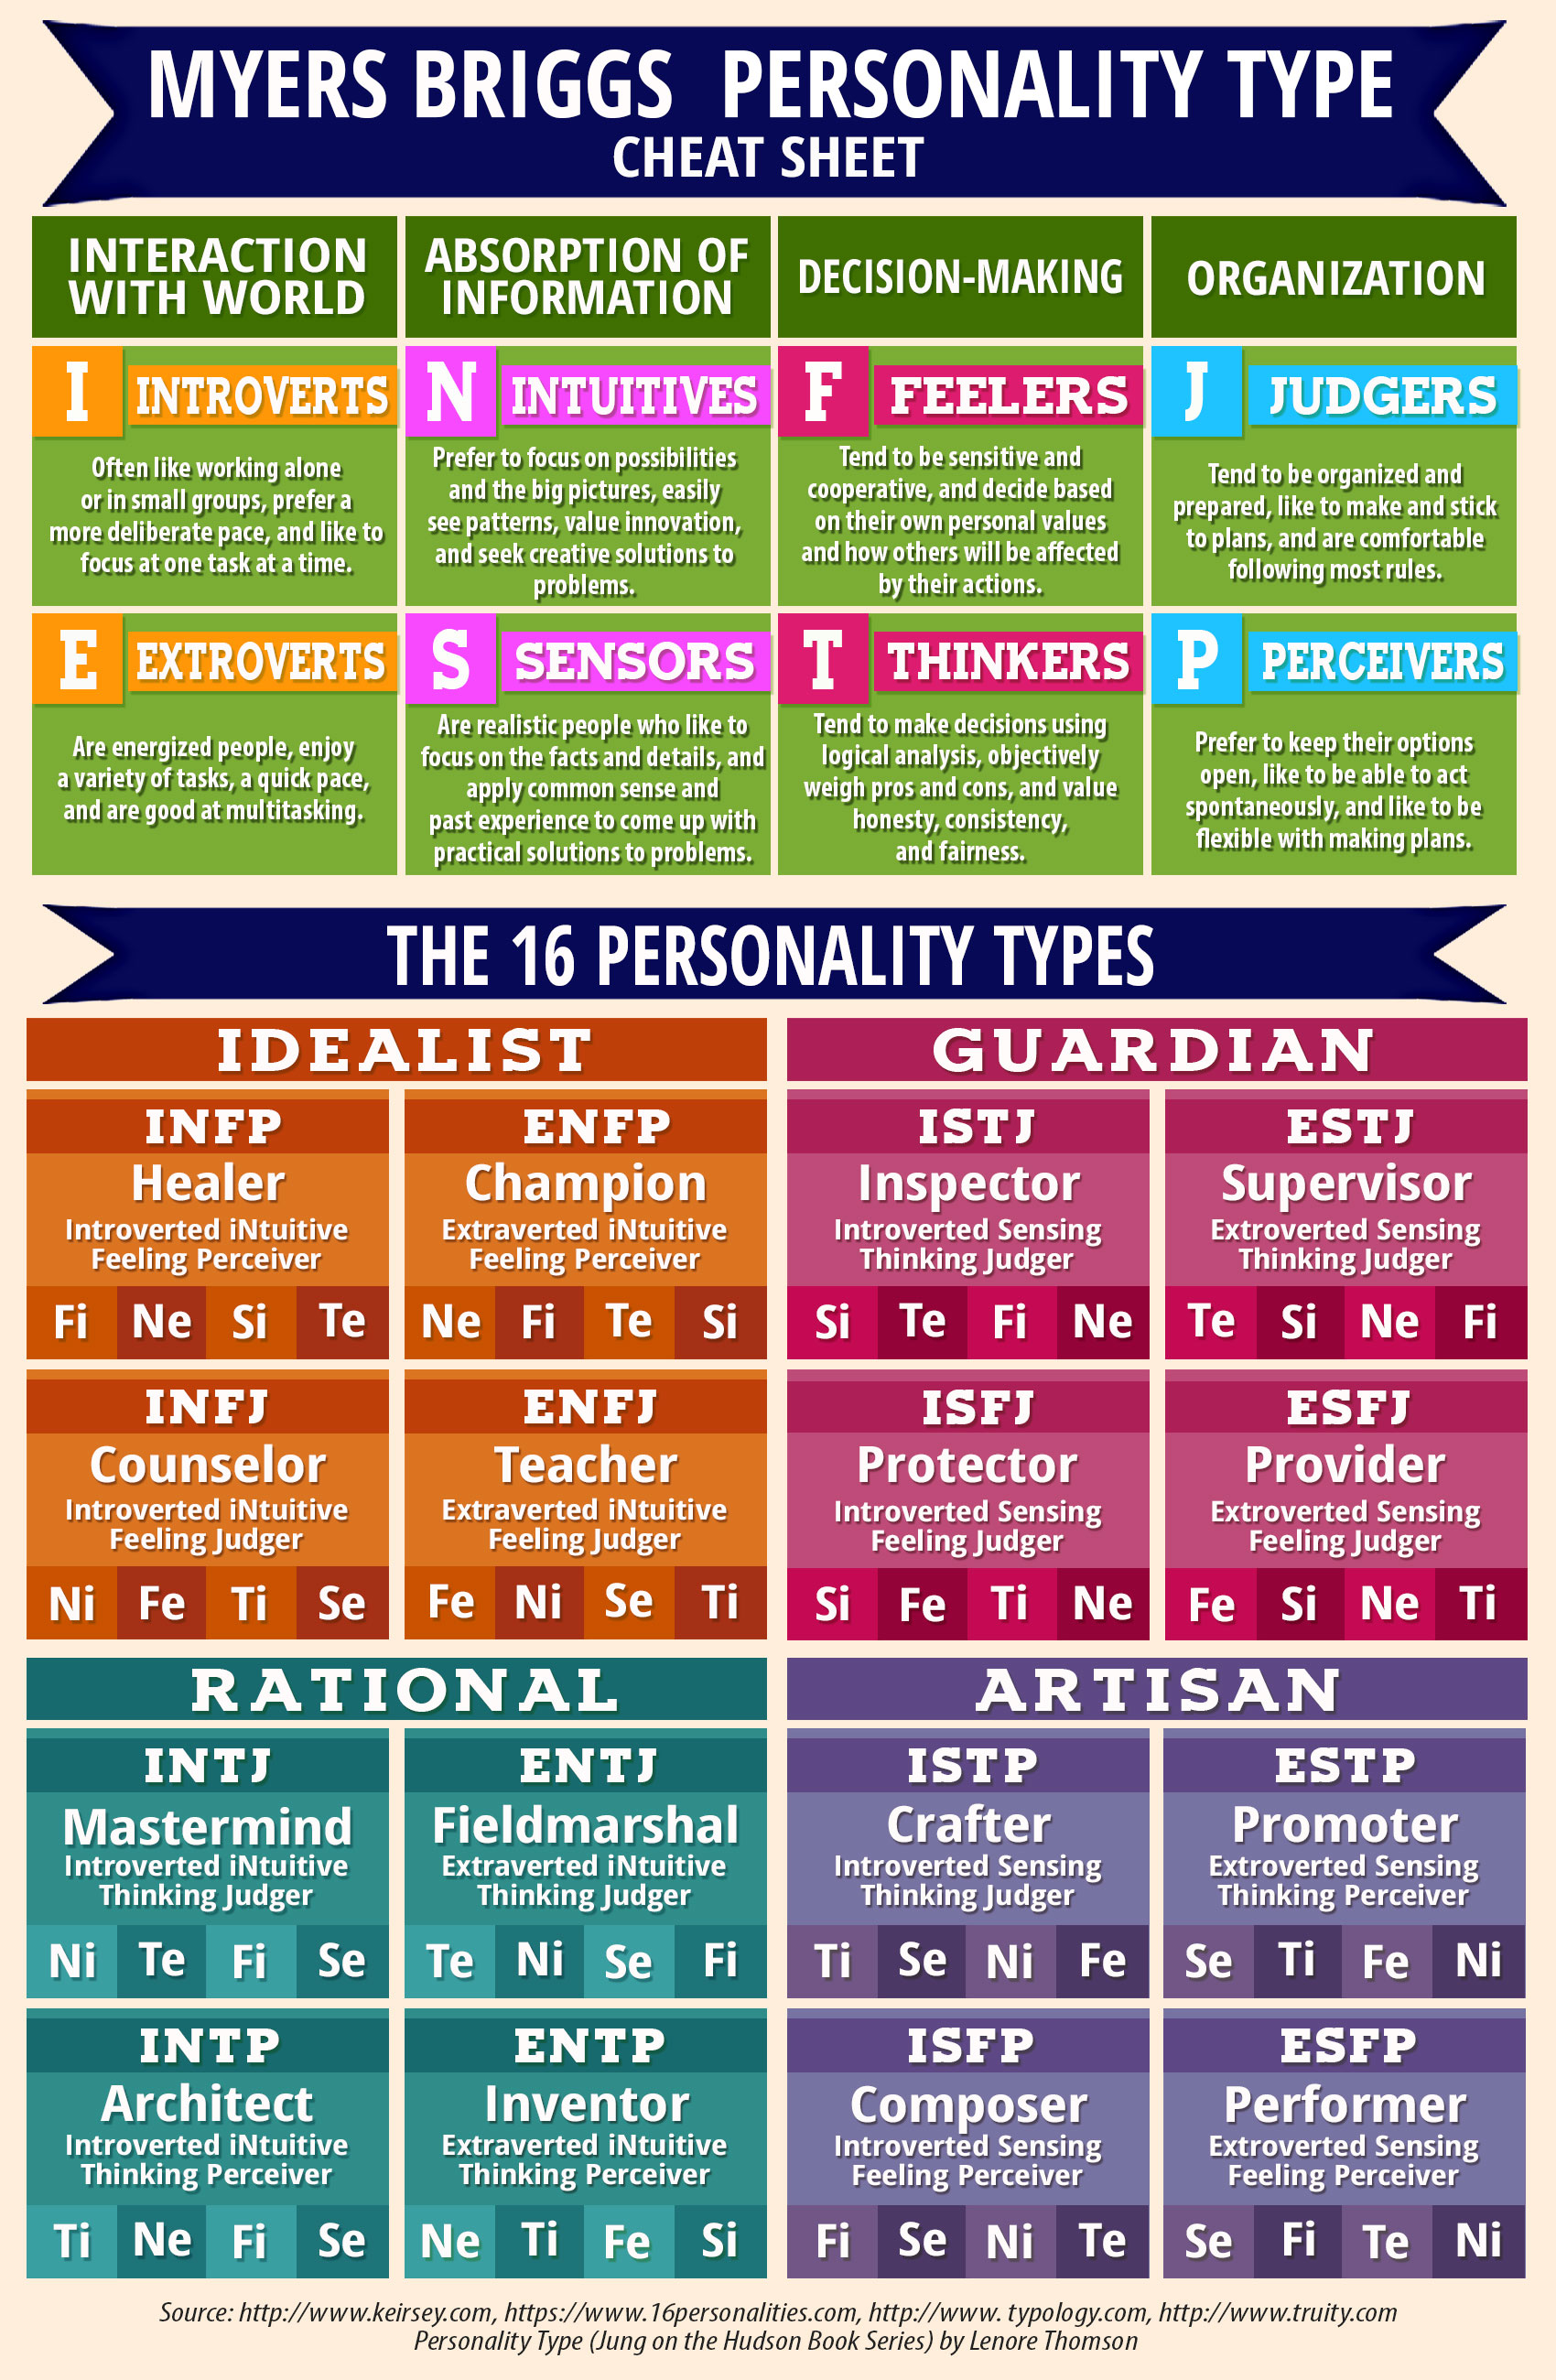 What are some Myers-Briggs personality types?